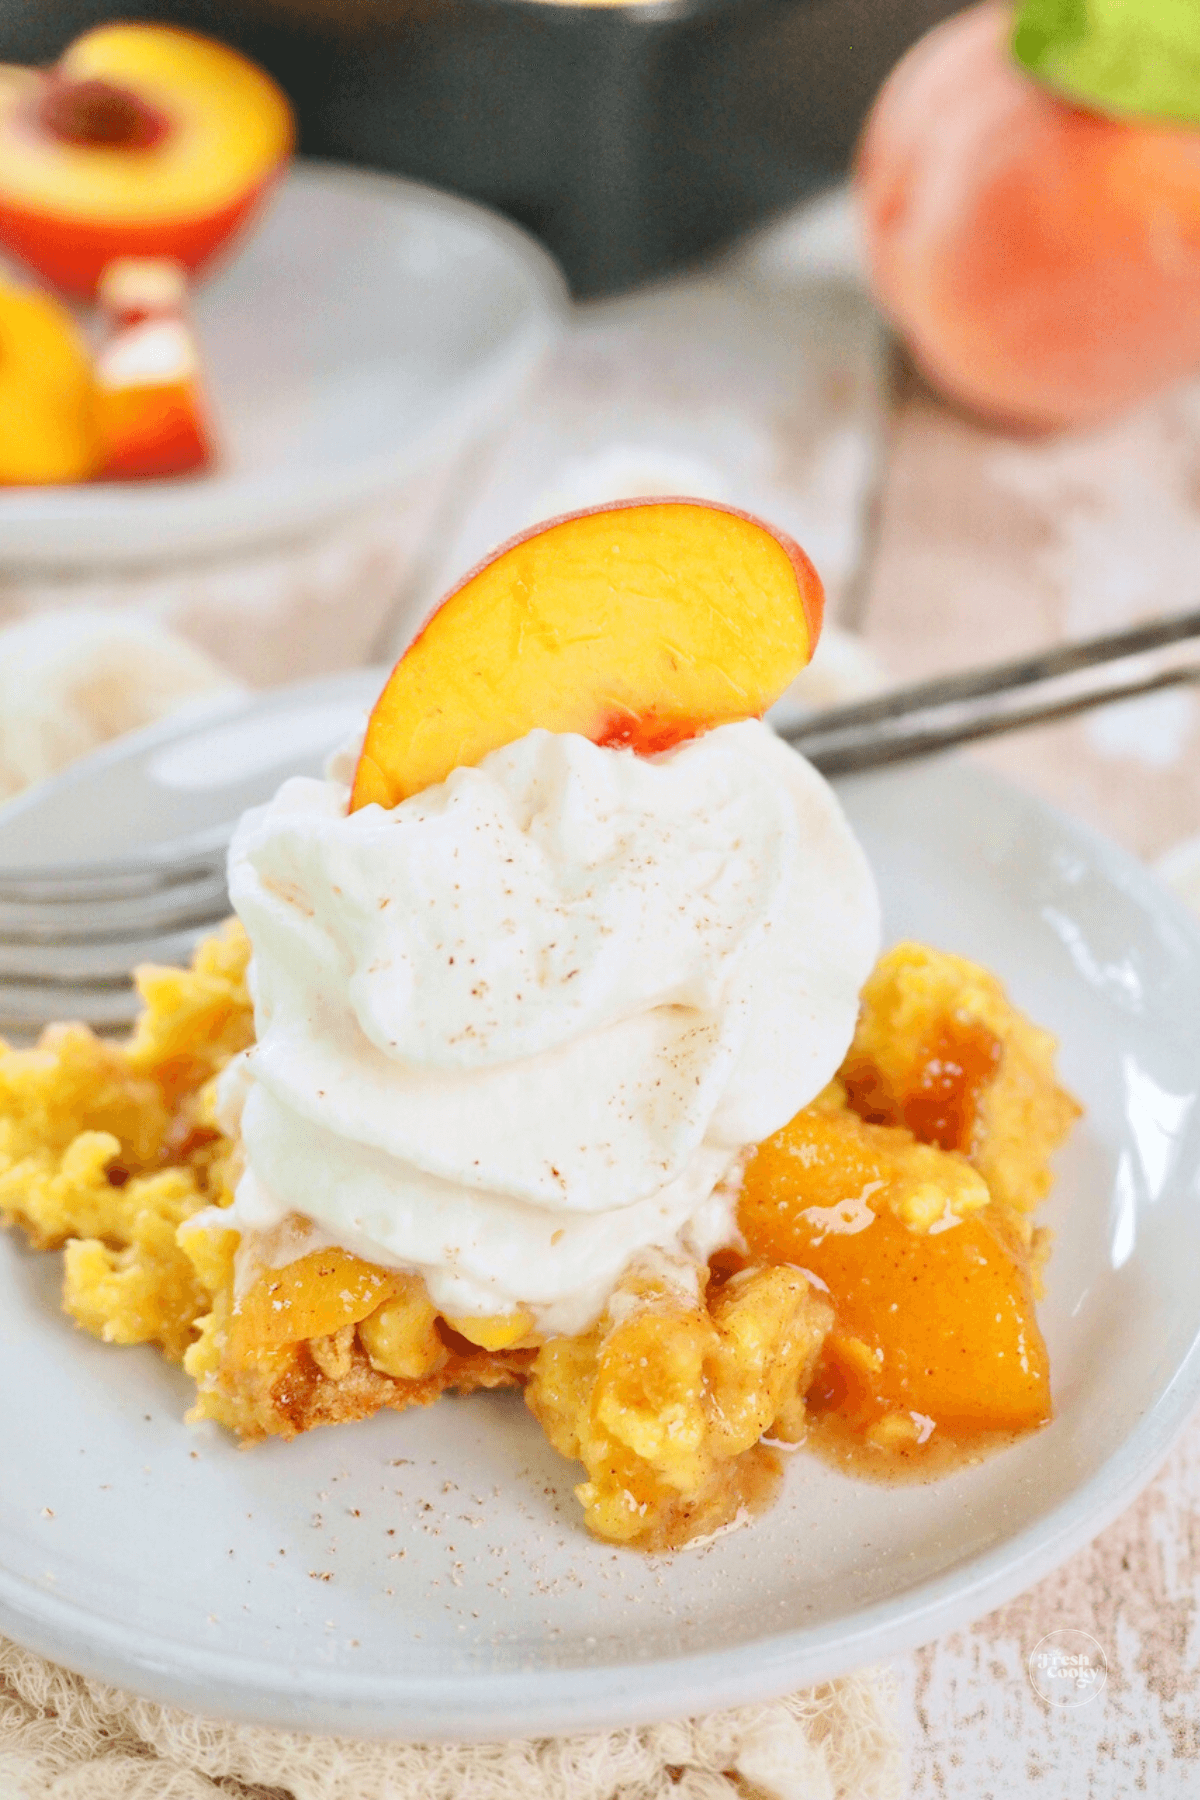 Slice of peach cobbler on plate with bourbon whipped cream and topped with a fresh slice of peach.